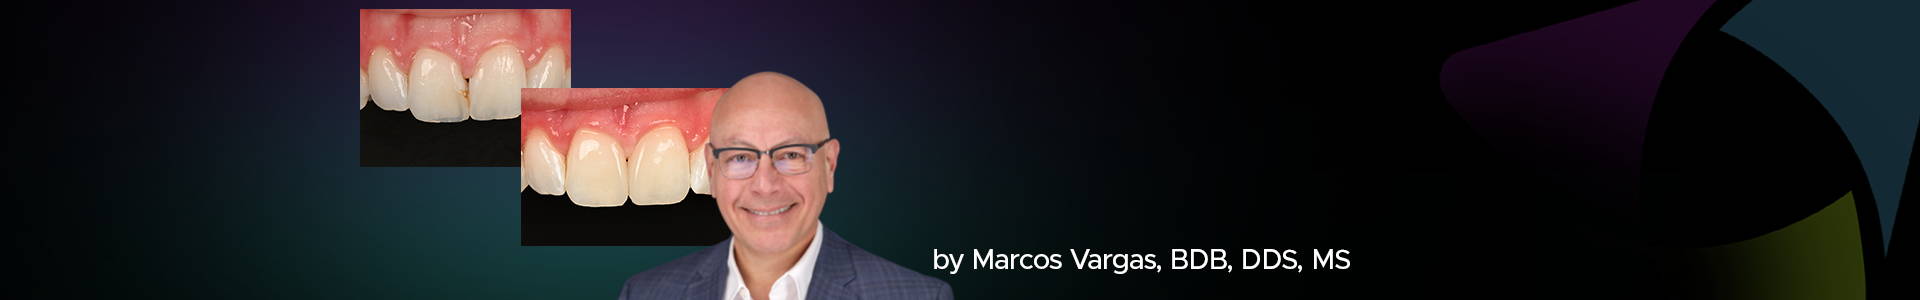 banner featuring Dr Marcos Vargas and two clinical images in the back